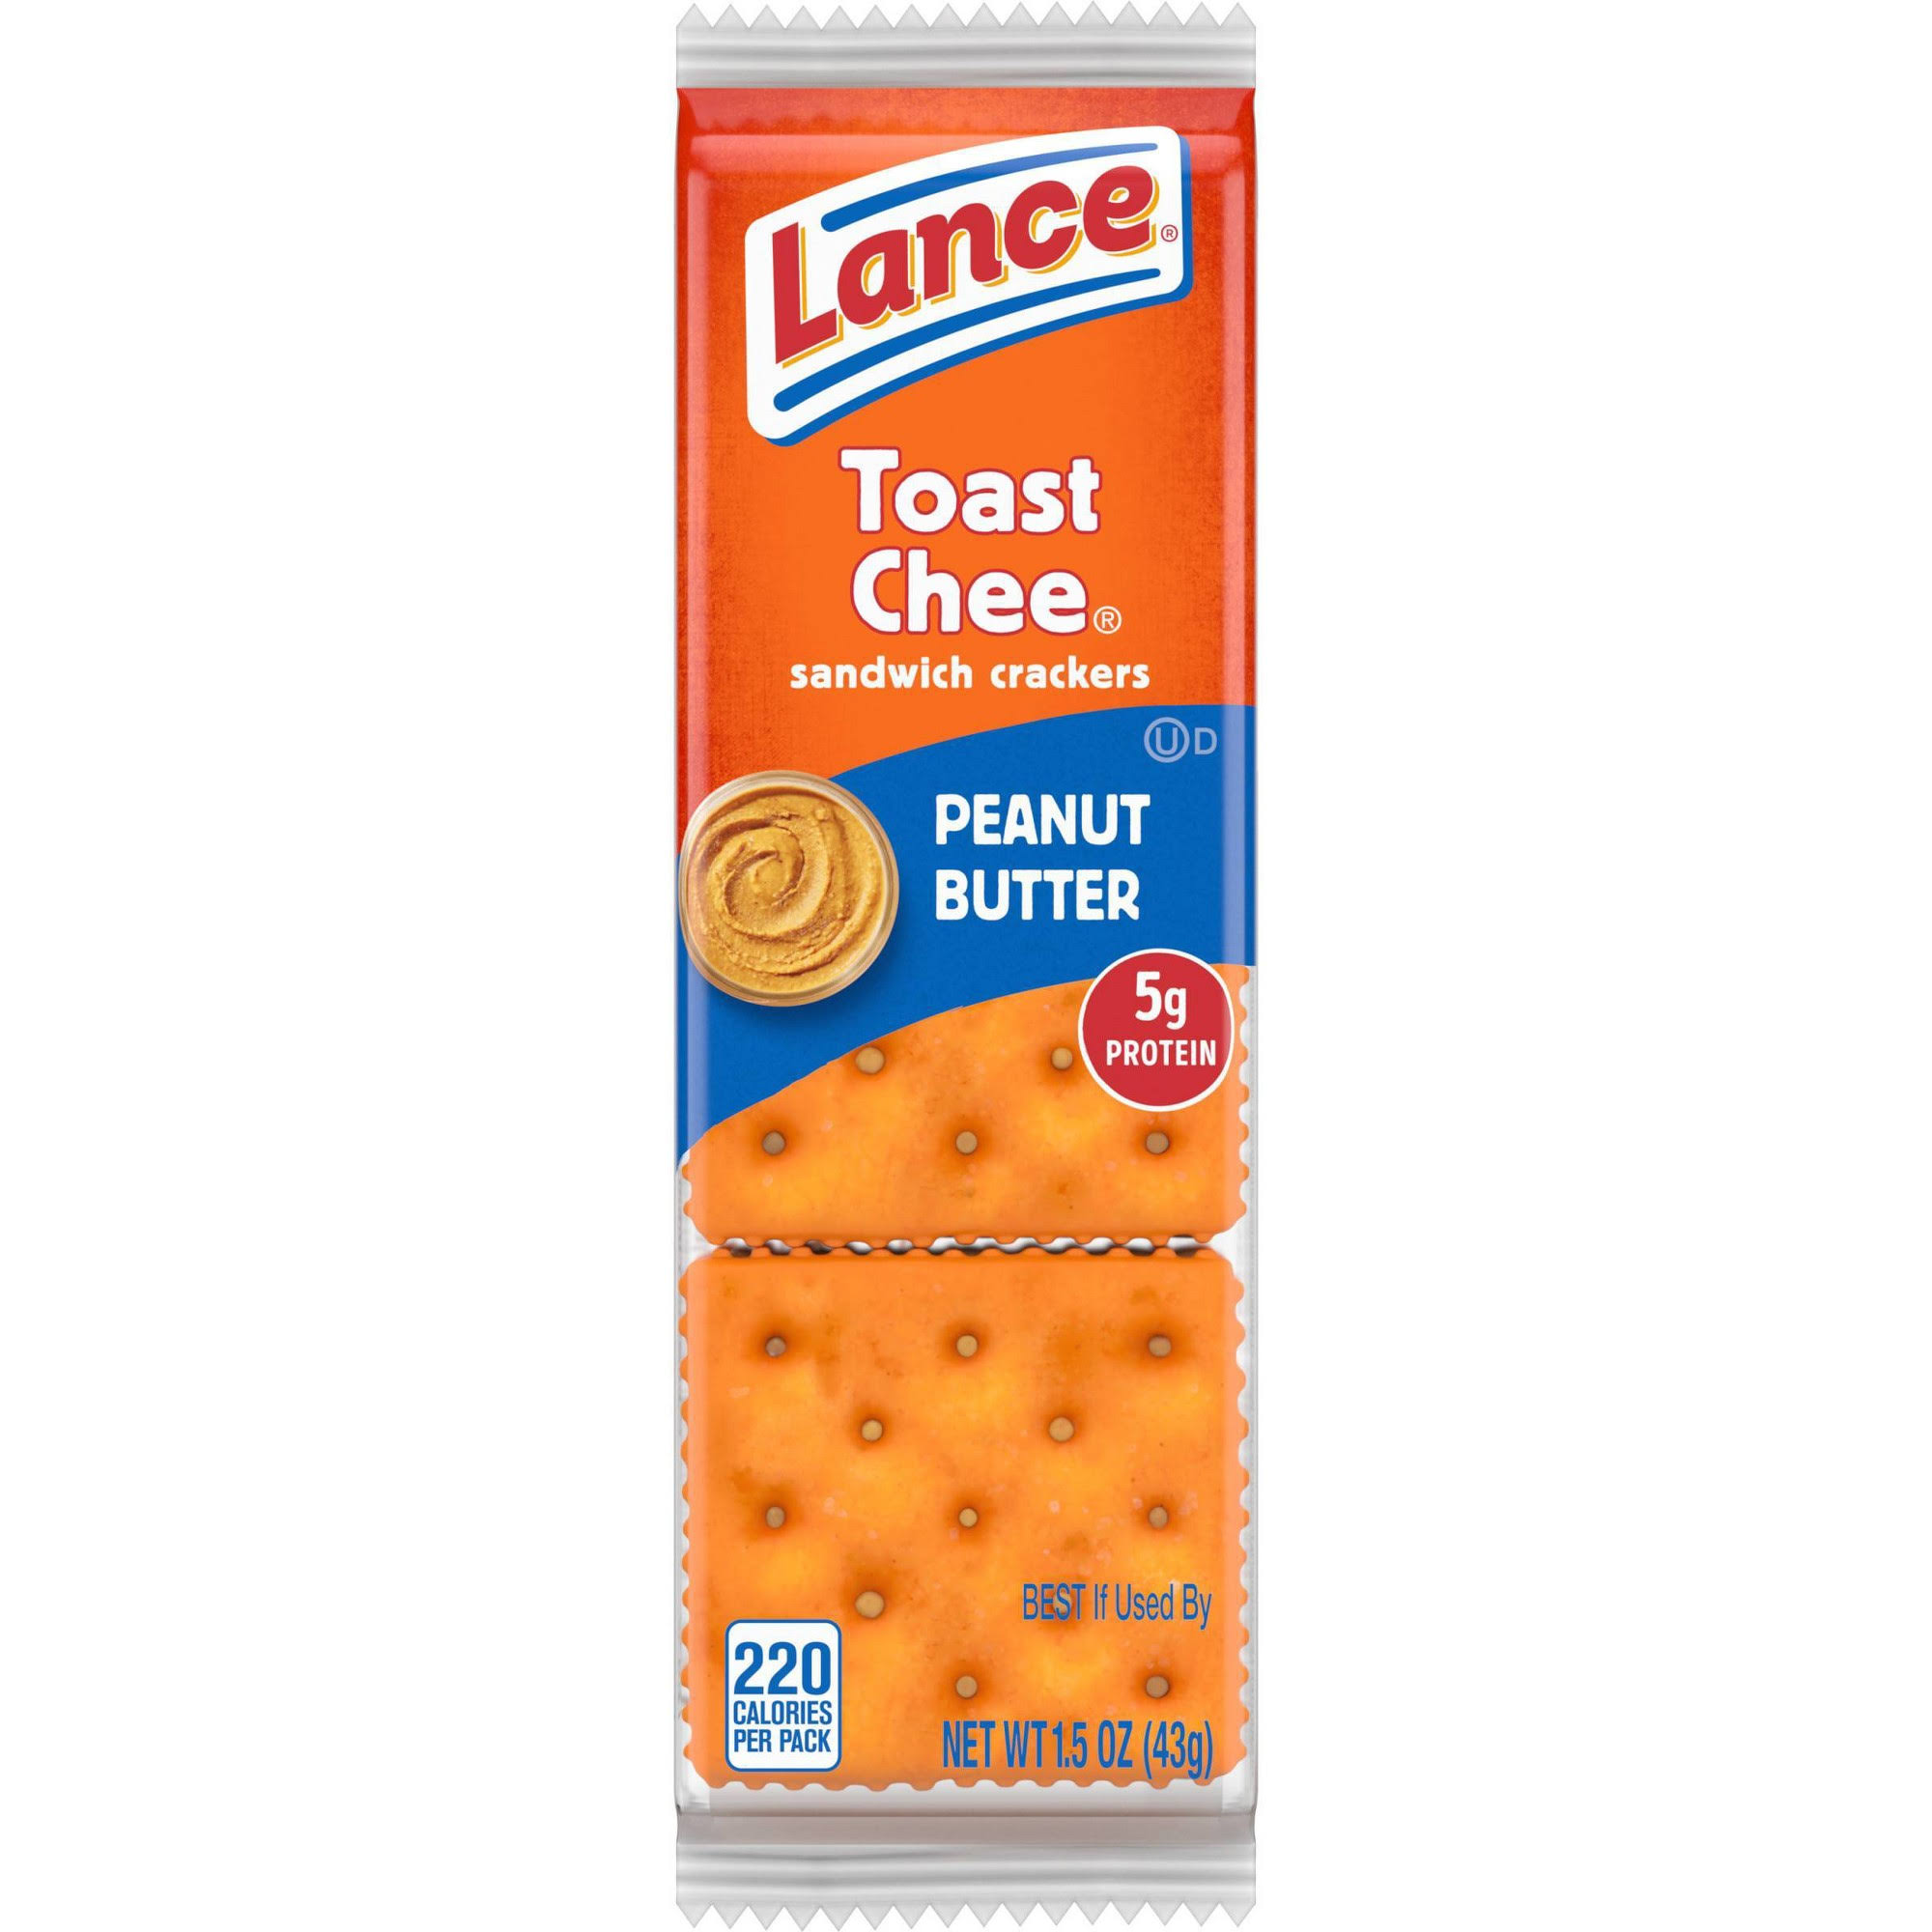 Lance Toast Chee Crackers - Peanut Butter, 43g